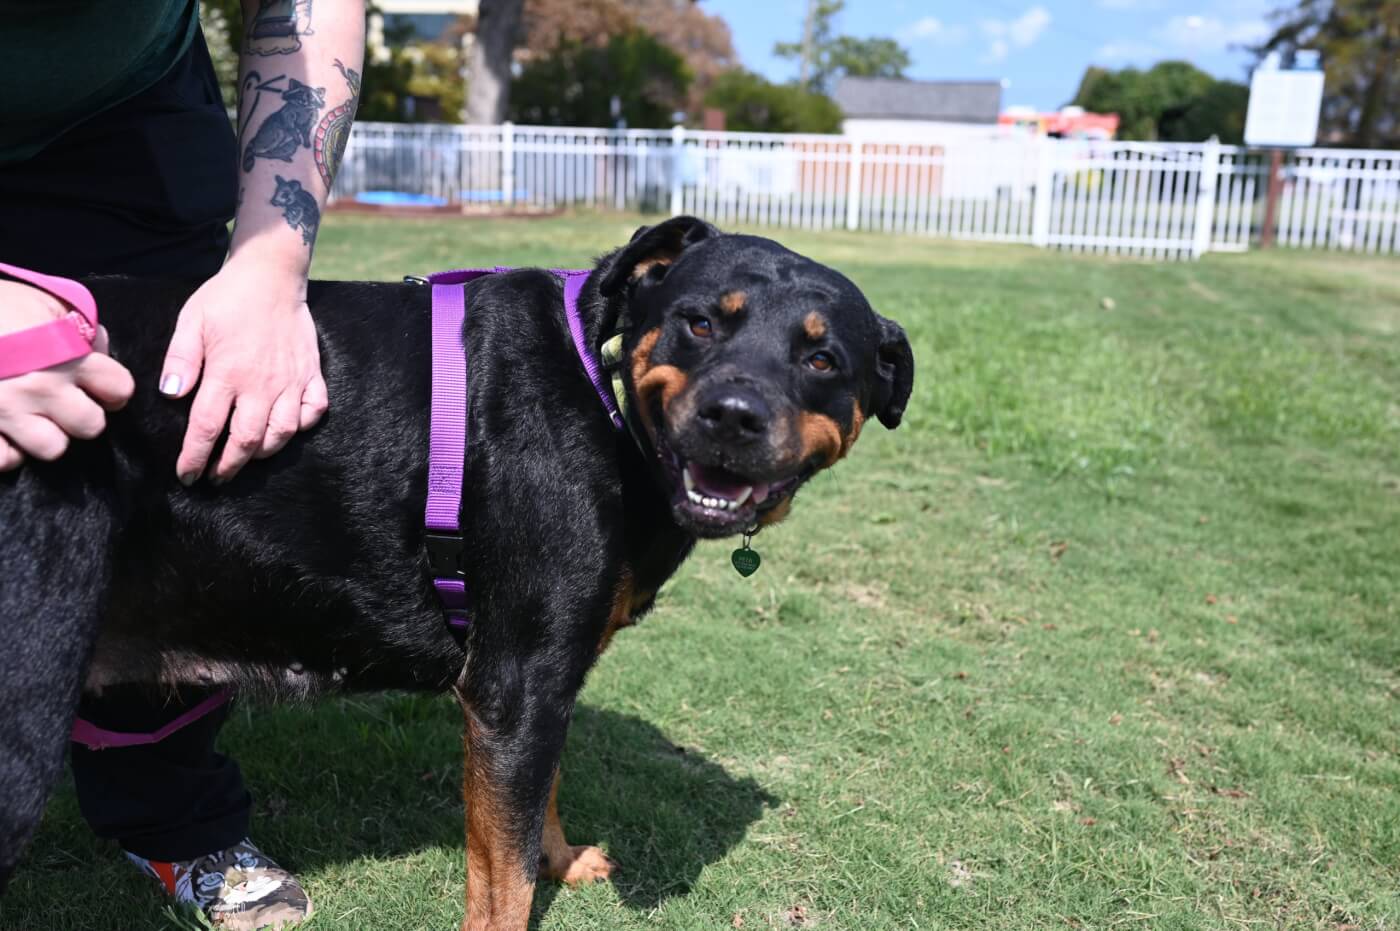 Lucy the Rottweiler looks at the camera in a grassy dog park